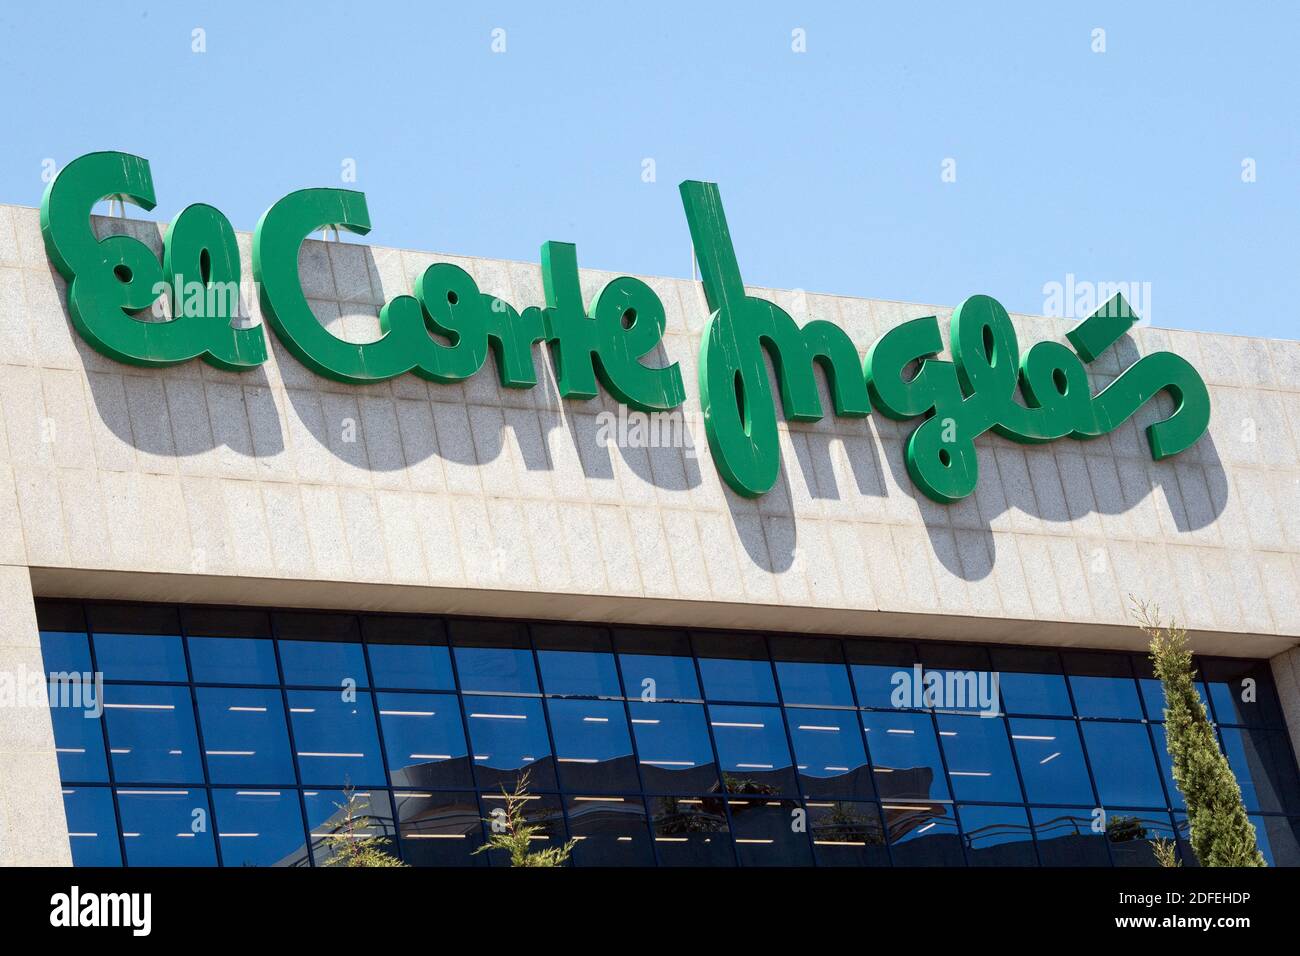 A shop sign of El Corte Ingles, on July 7, 2020 in Marbella, Spain. Photo  by David Niviere/ABACAPRESS.COM Stock Photo - Alamy